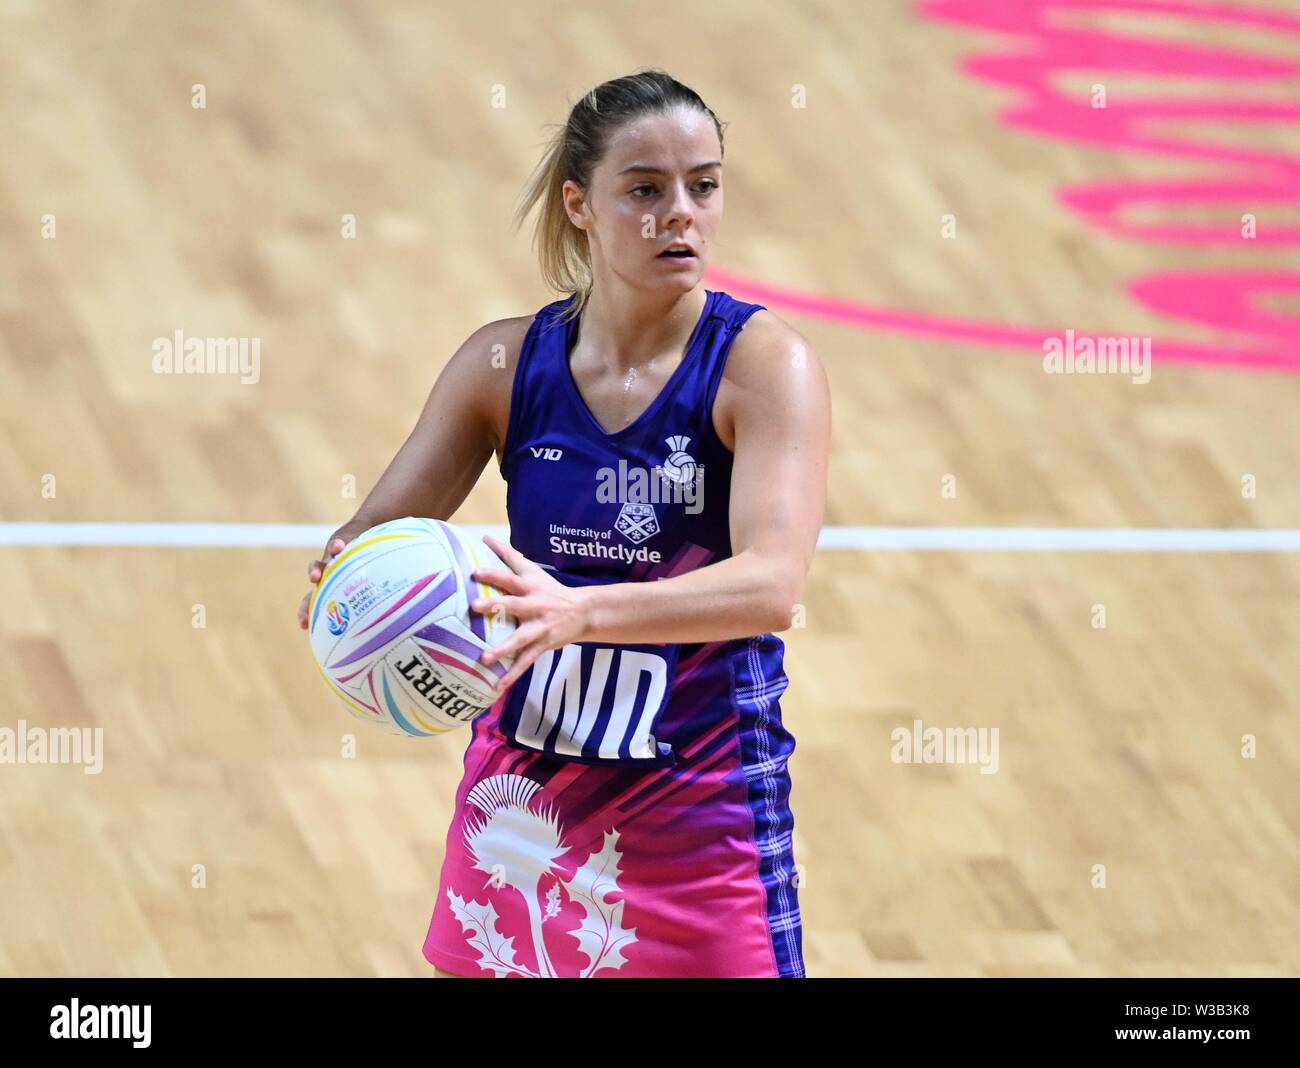 Liverpool, UK. 14 July 2019. Kelly Boyle (Scotland) during the Preliminary game between Uganda and Scotland at the Netball World Cup. M and S arena, Liverpool. Merseyside. UK. Credit Garry Bowdenh/SIP photo agency/Alamy live news. Stock Photo